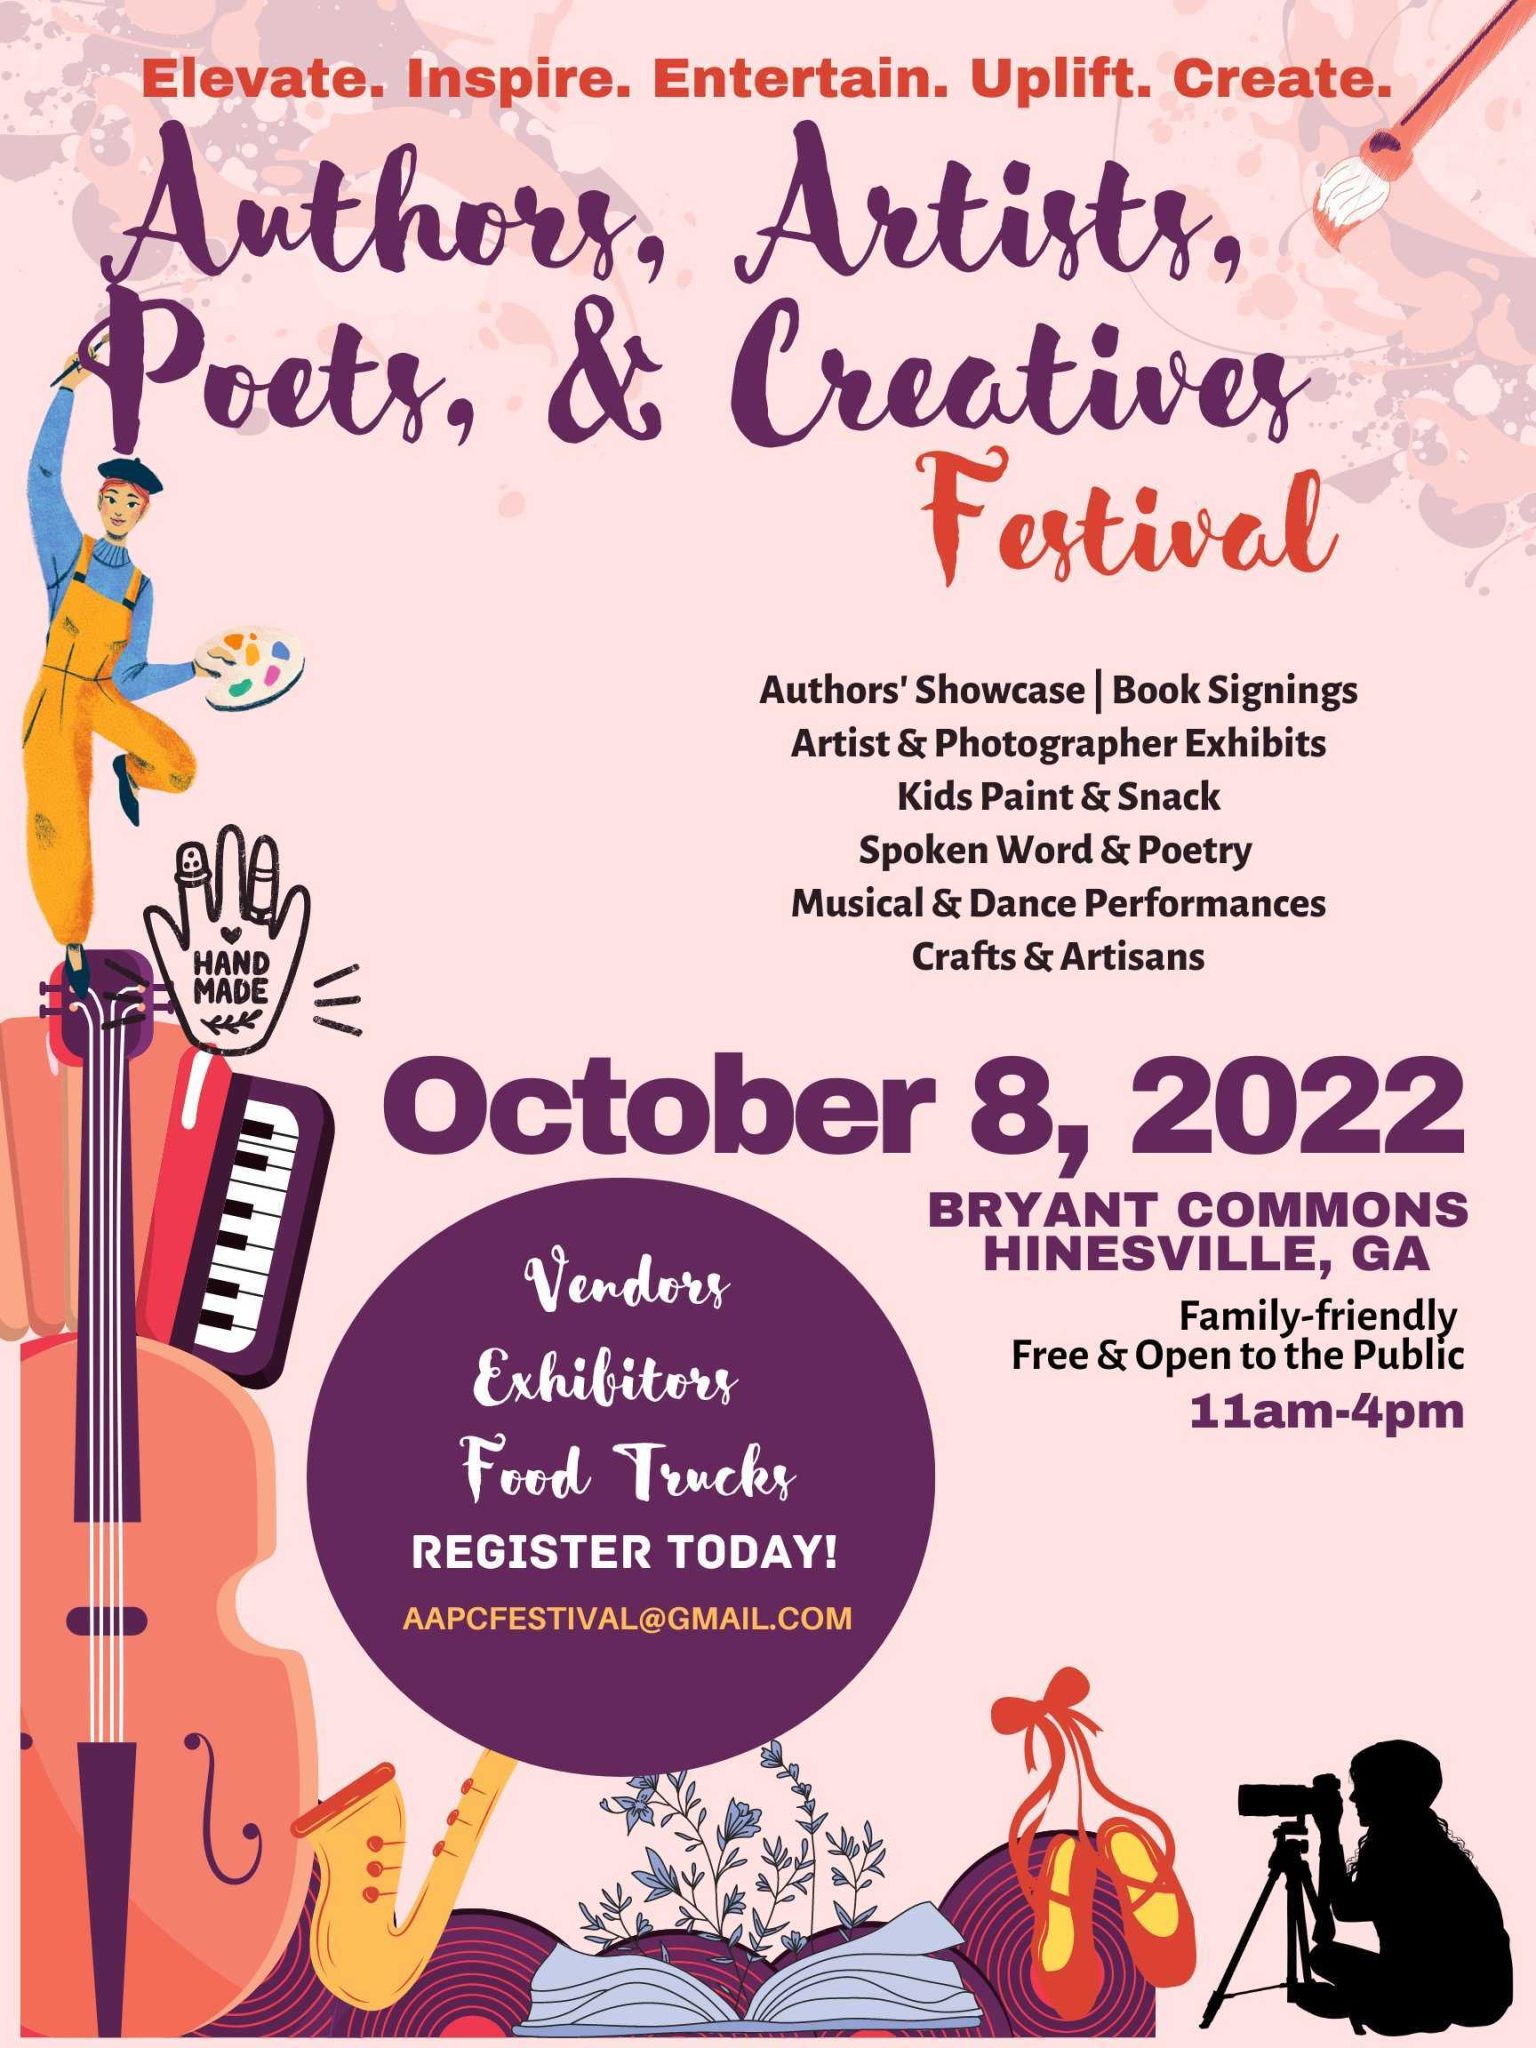 Flyer for Authors, Artists, Poets, & Creatives Festival